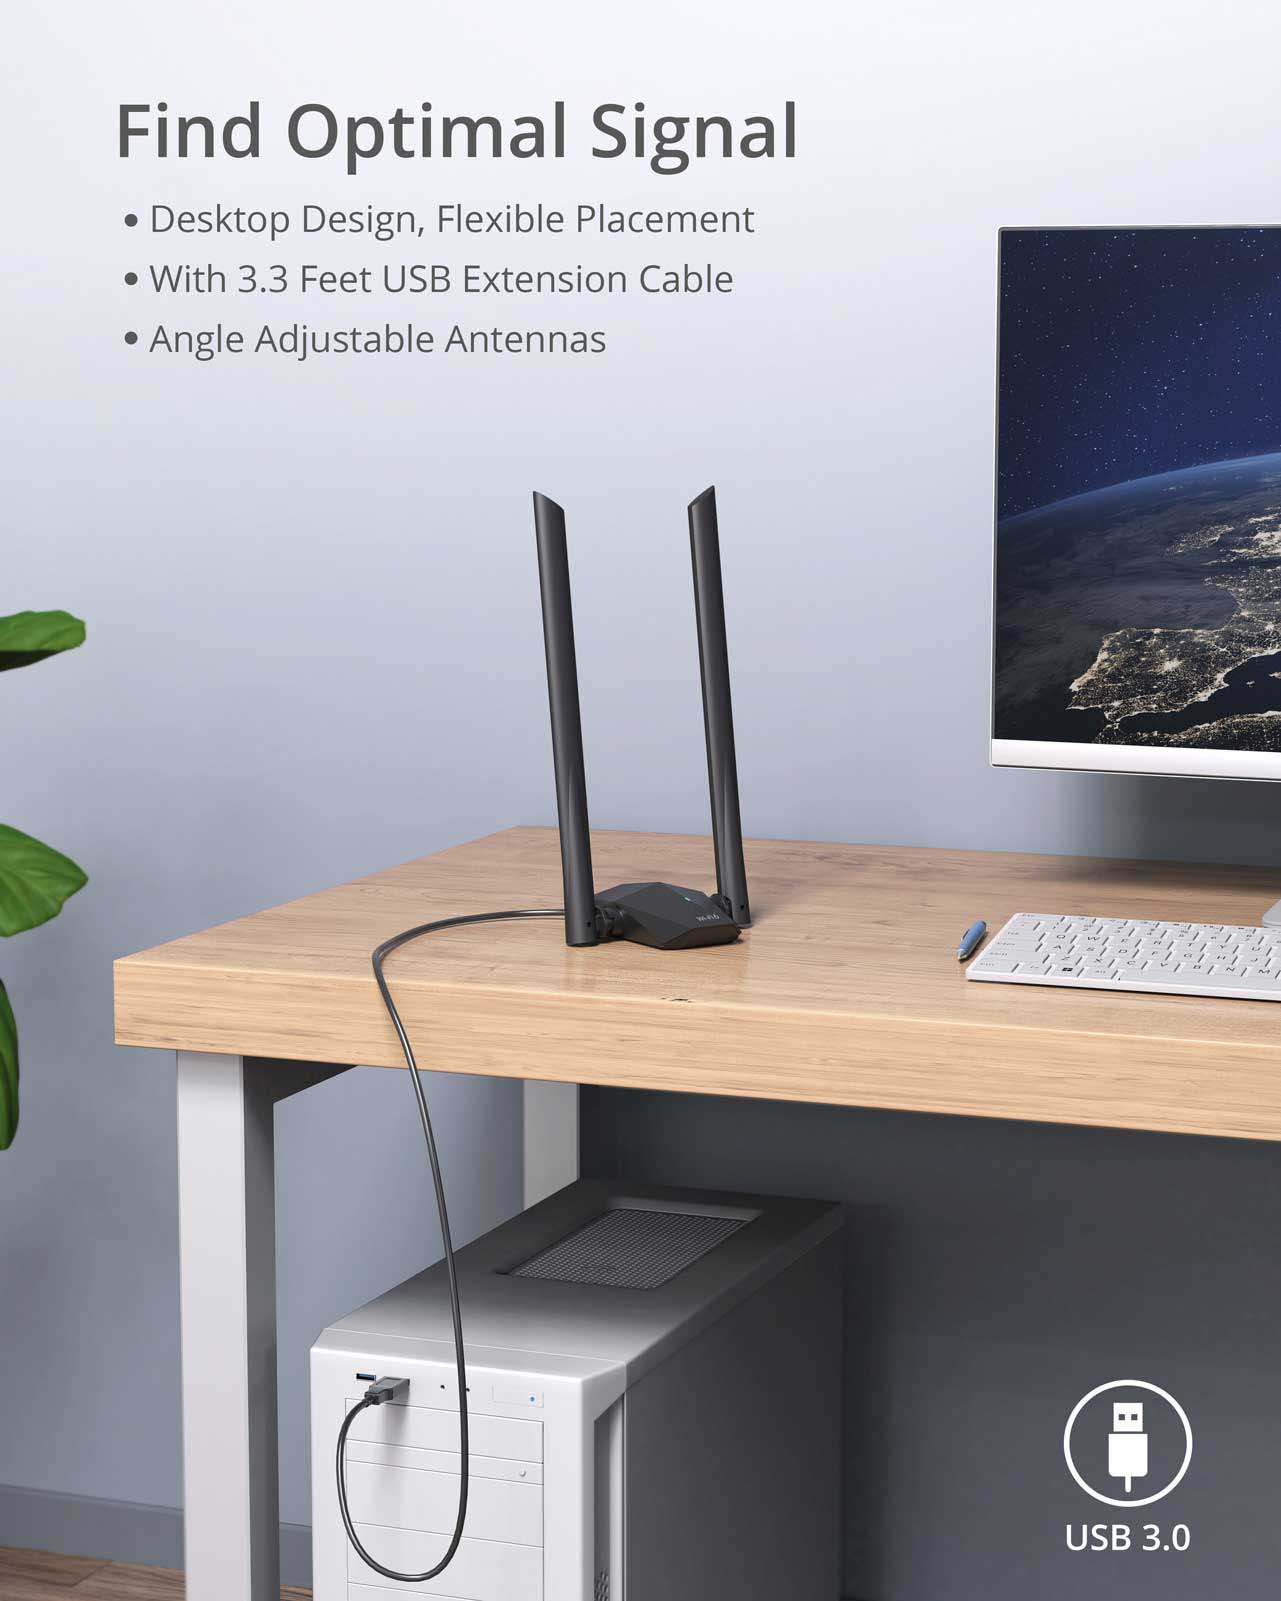 The USB wifi adapter comes with desktop design and a 3.3-feet USB 3.0 extension cable